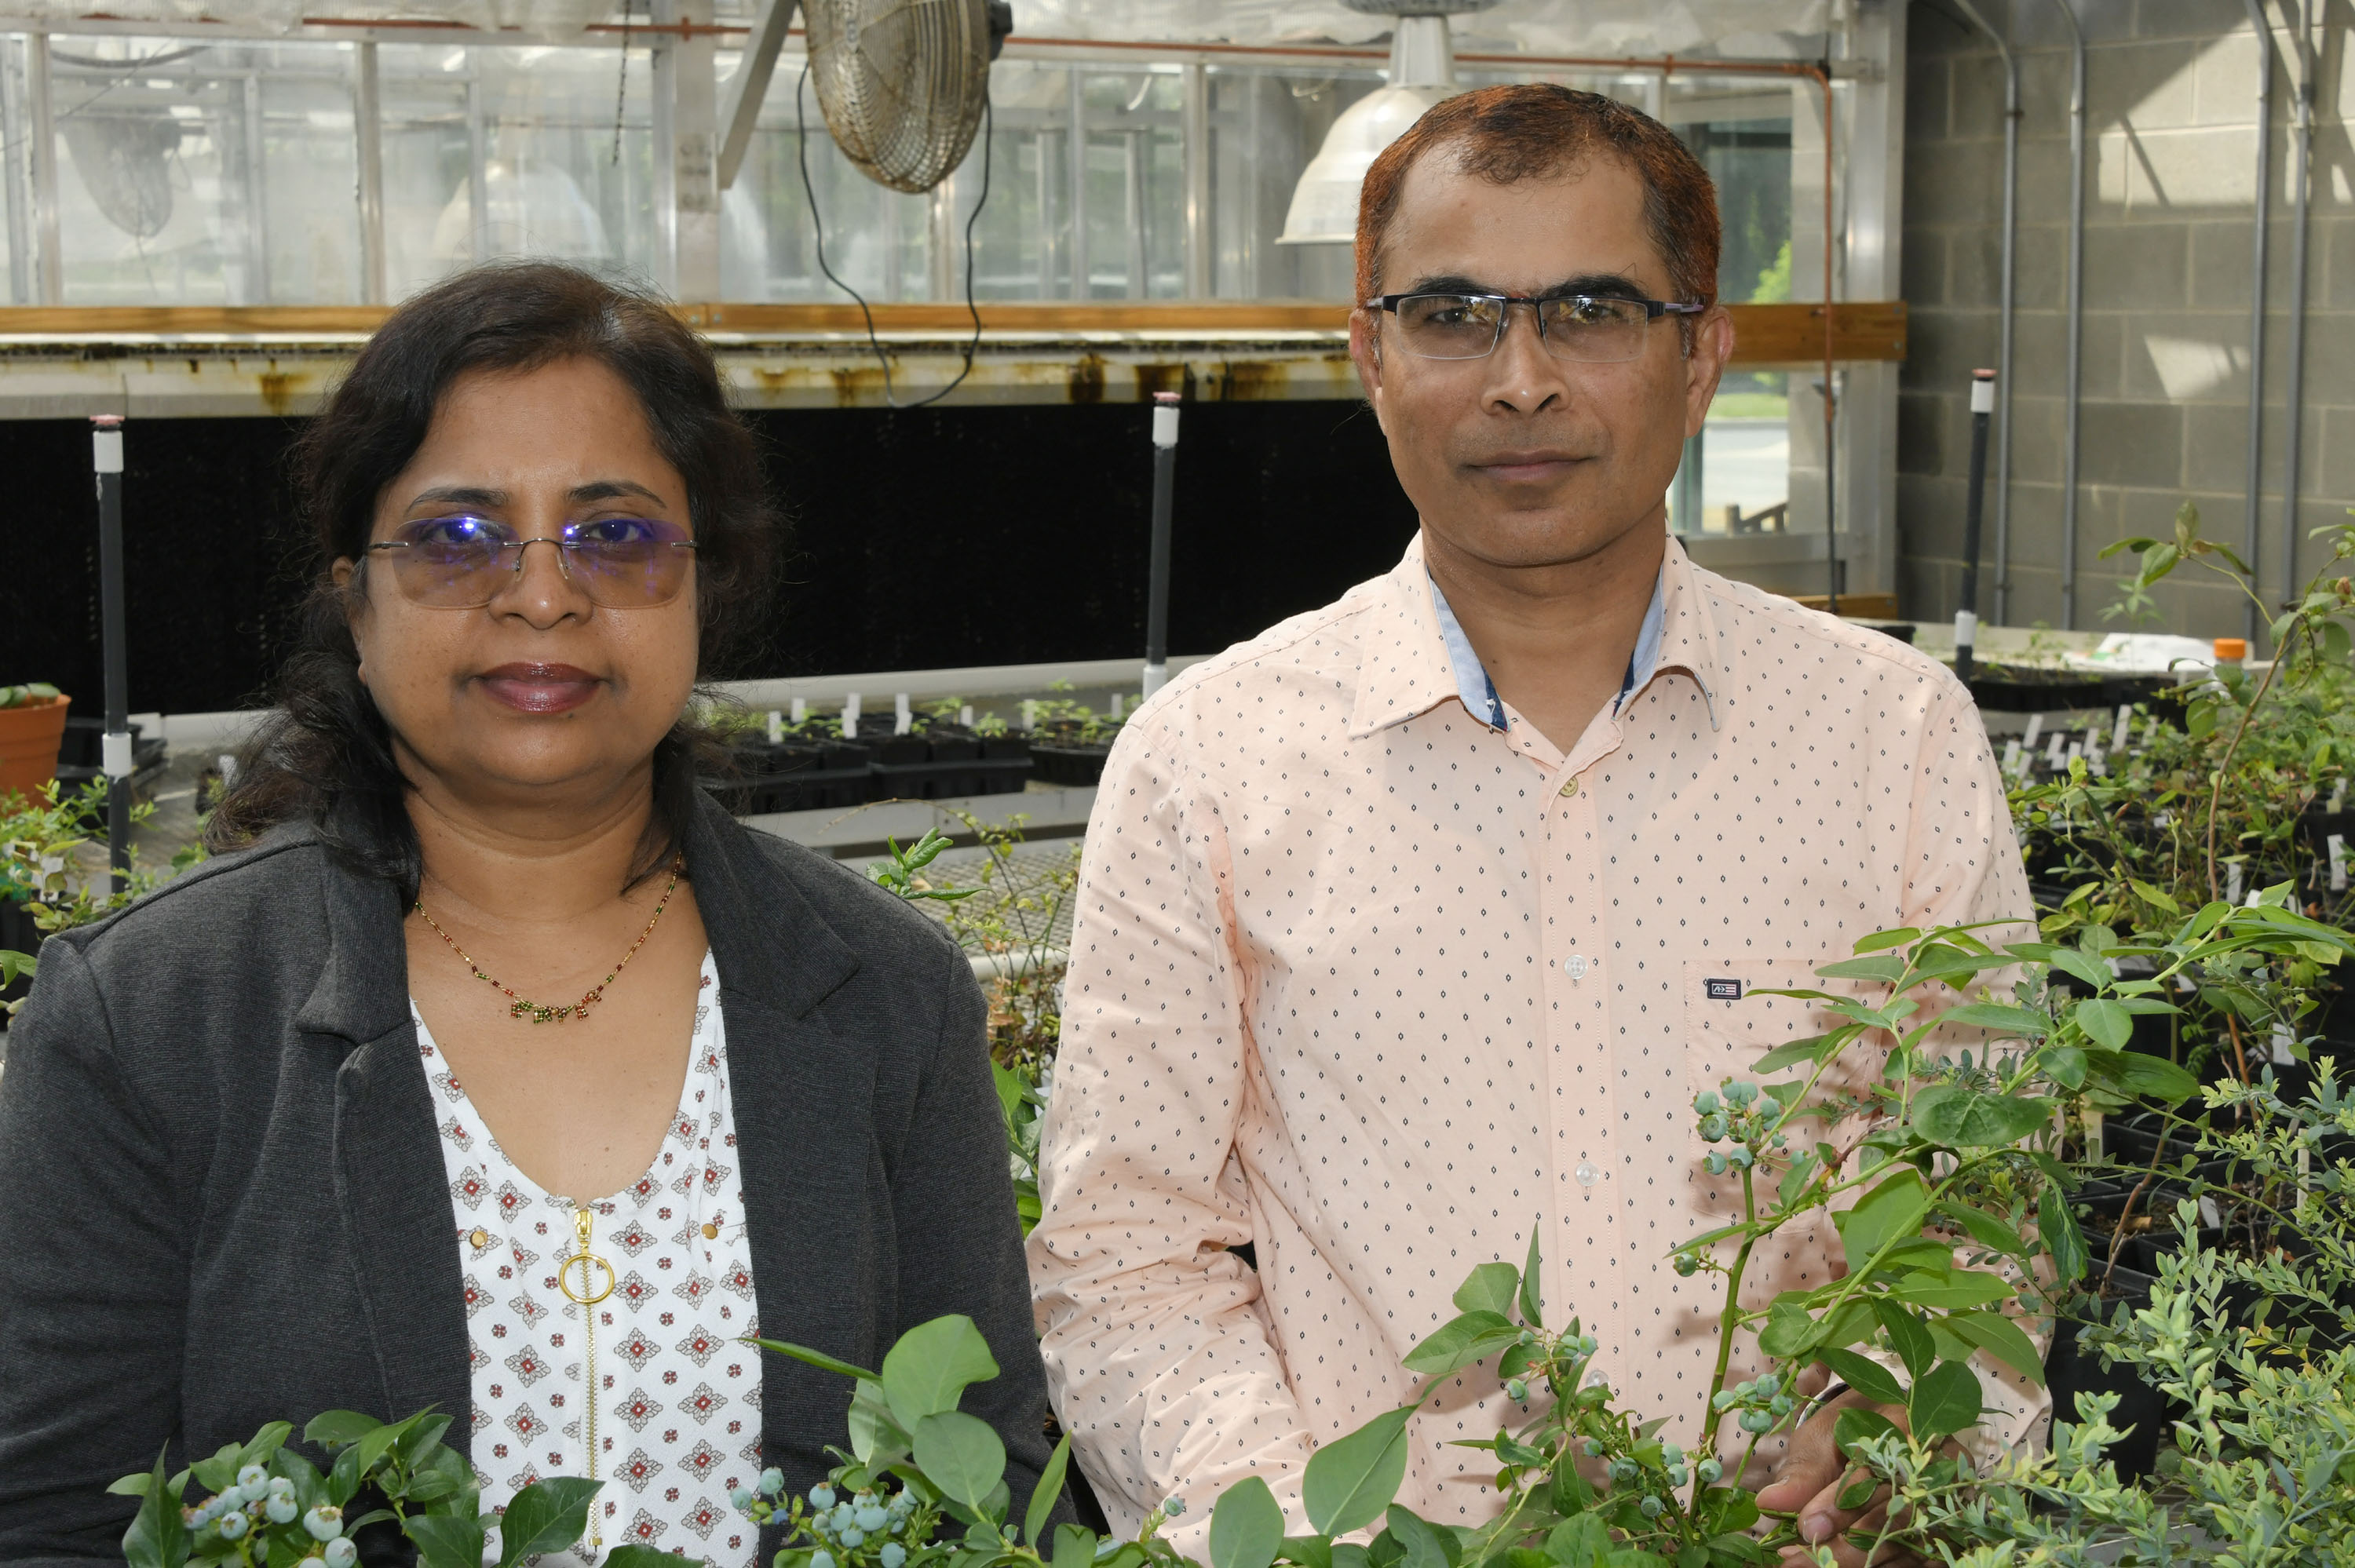 (L-r) Drs. Kalpalatha Malmaiee and Krishnanand Kulkami are engaged in complimentary blueberry research projects.